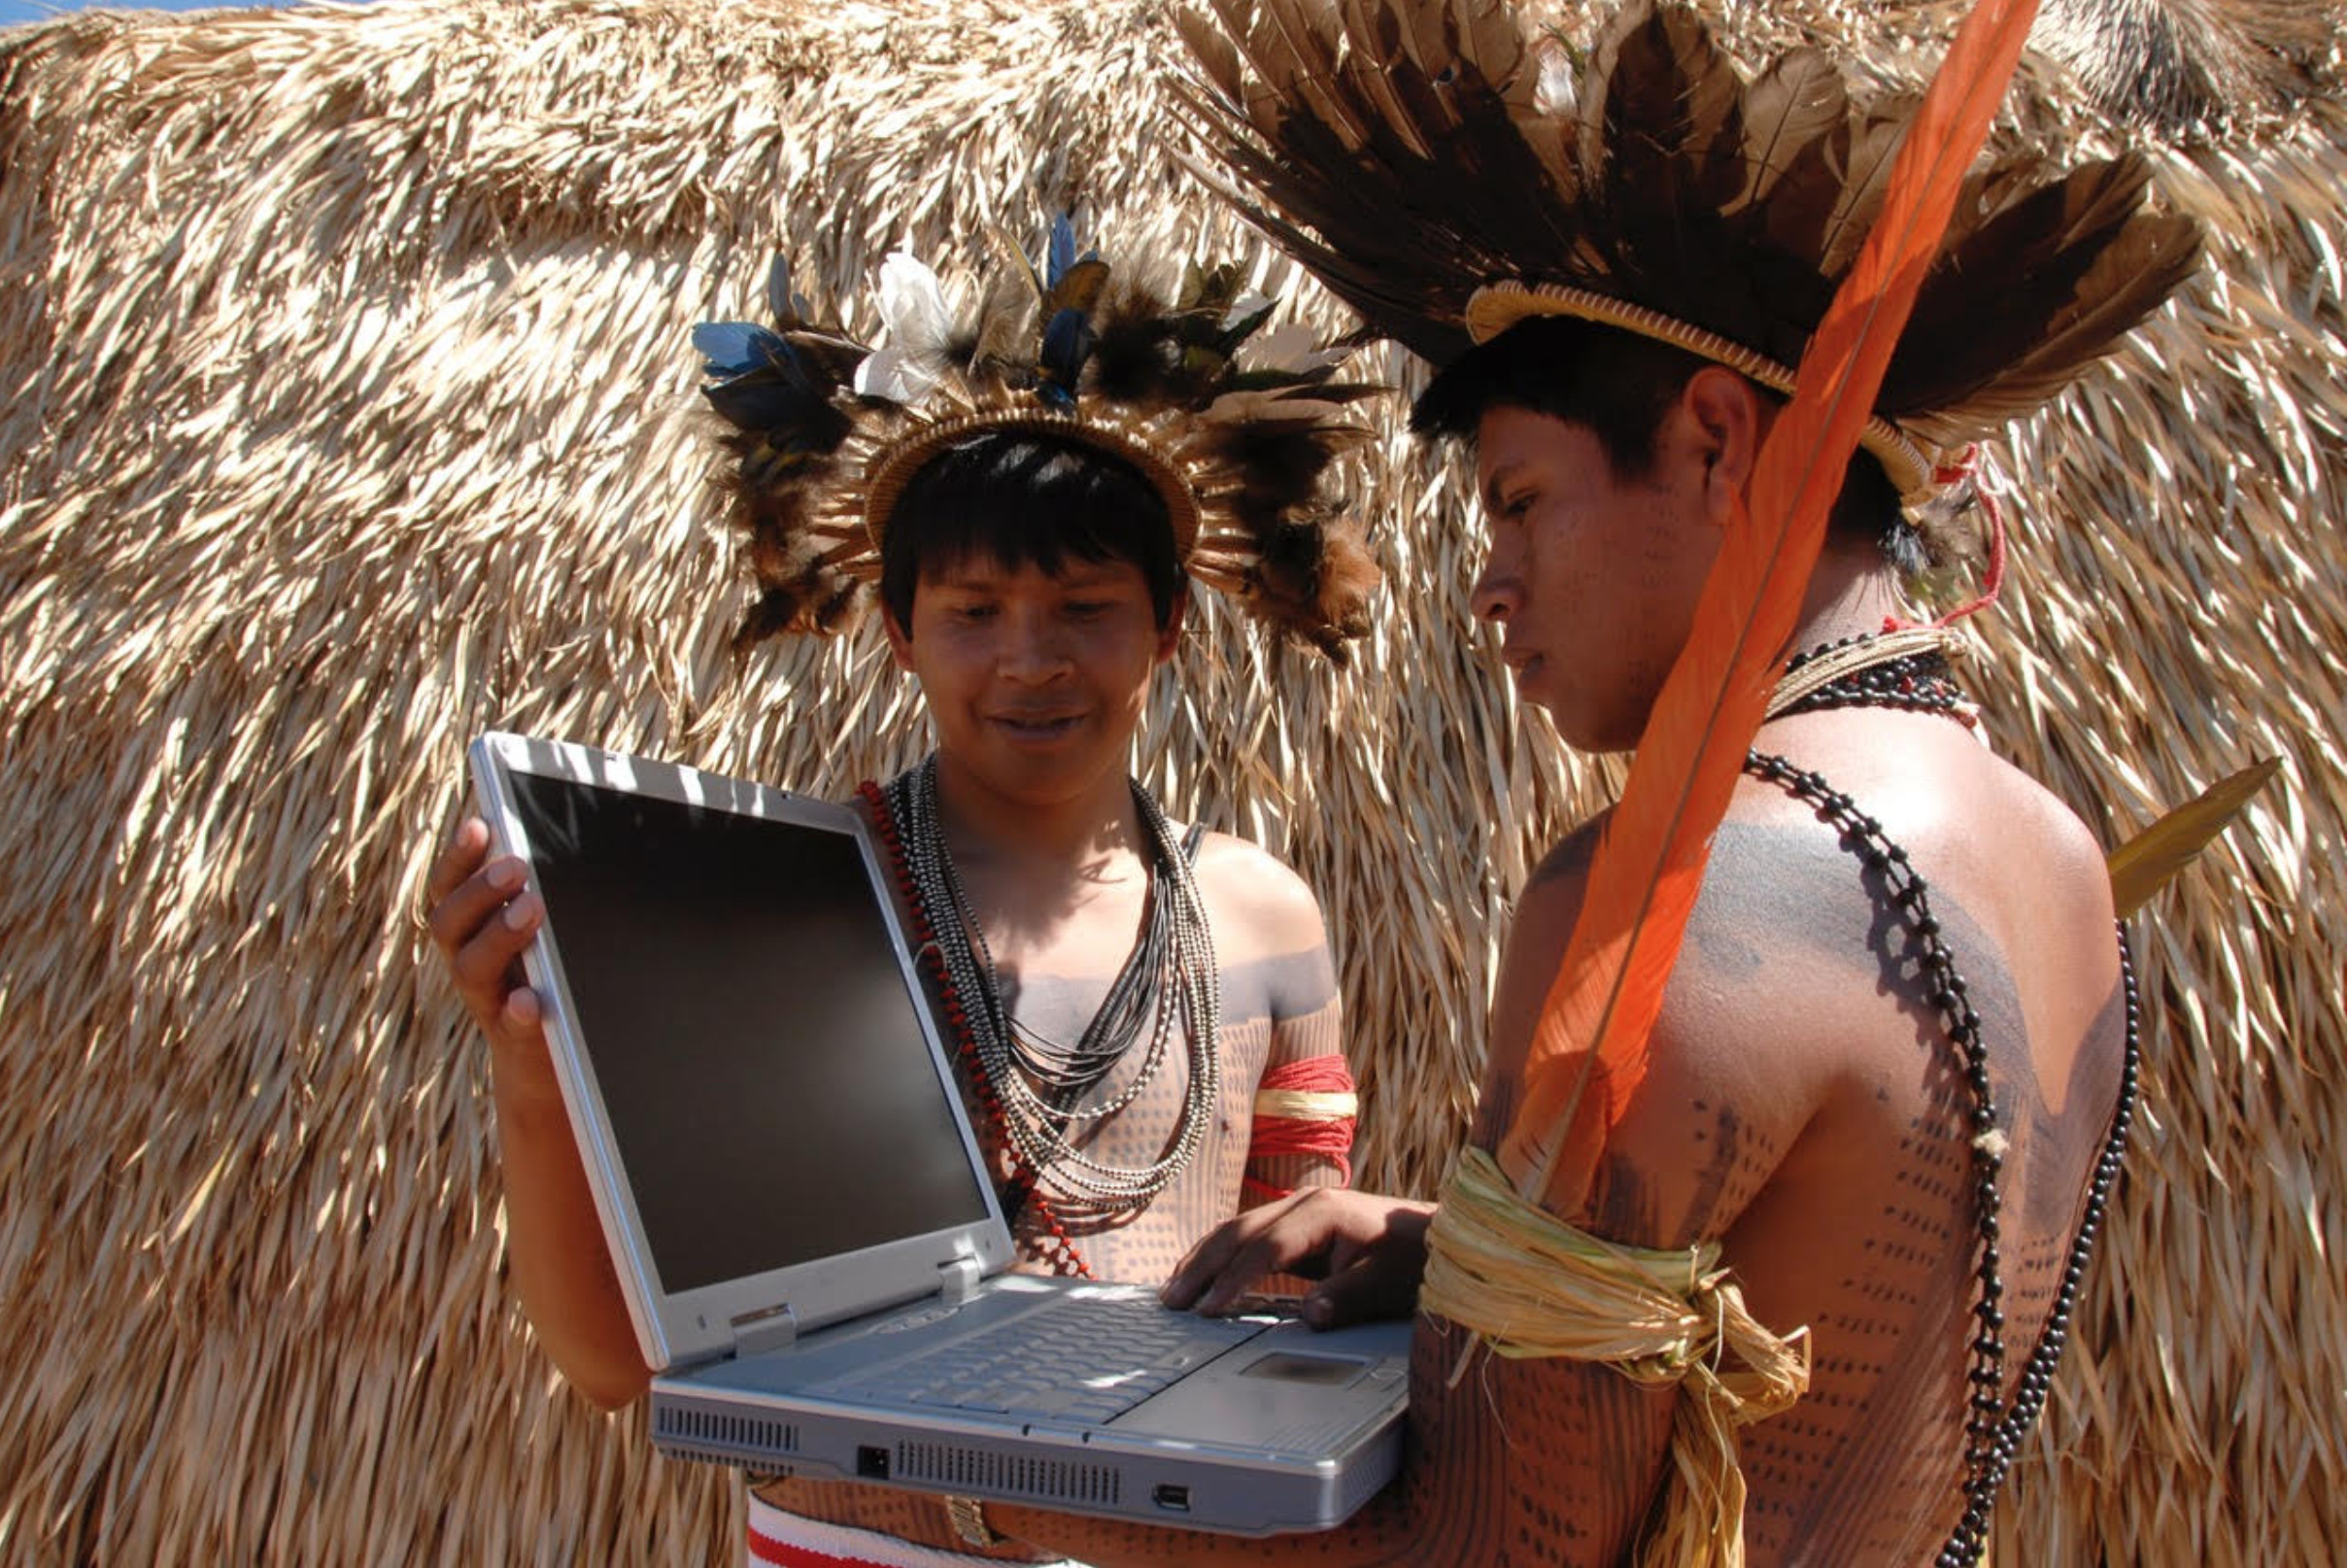 Picture shows members from the Surui Paiter Tribe in the Brazilian Amazon as they access the Internet in their remote community. Credit: Surui Metareila Association Archives. Courtesy of Vasco M. van Roosmalen from ECAM.